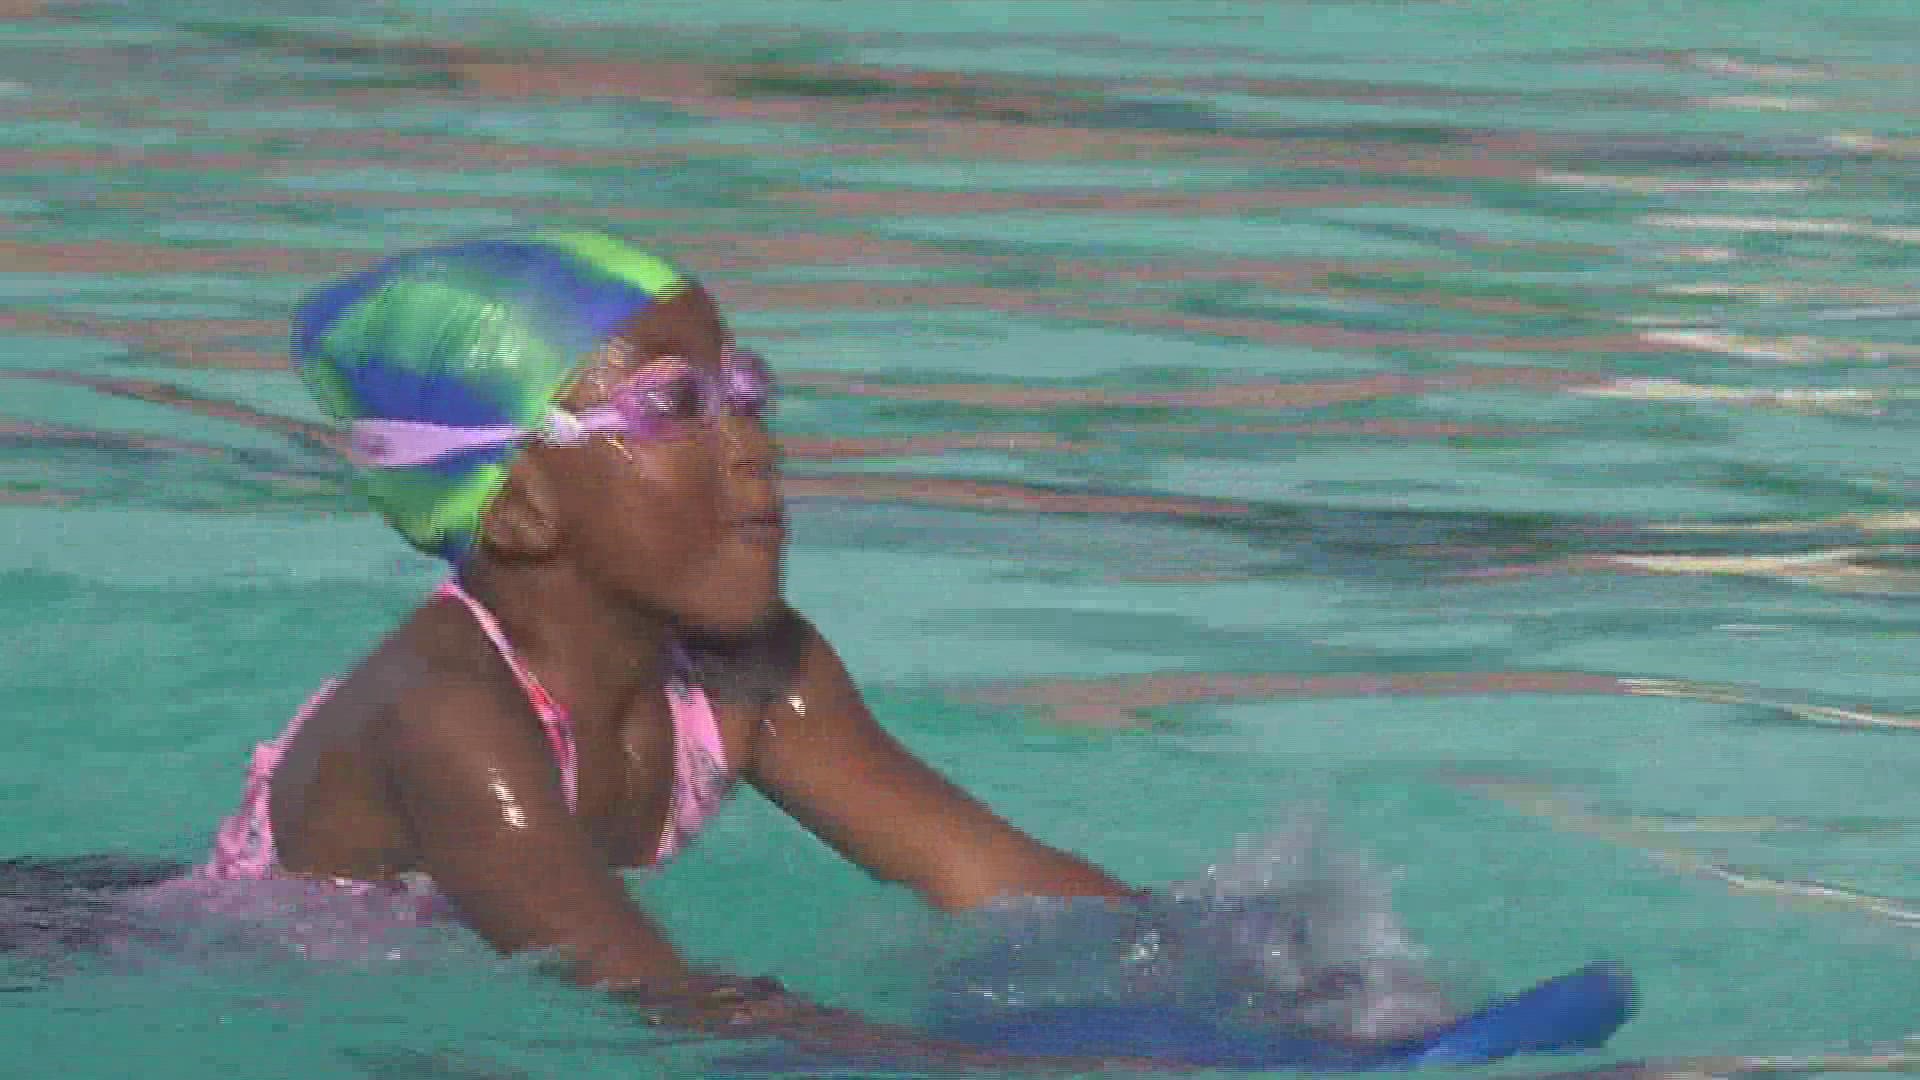 An alarming trend shows Black children are more likely to drown in pools than their counterparts.